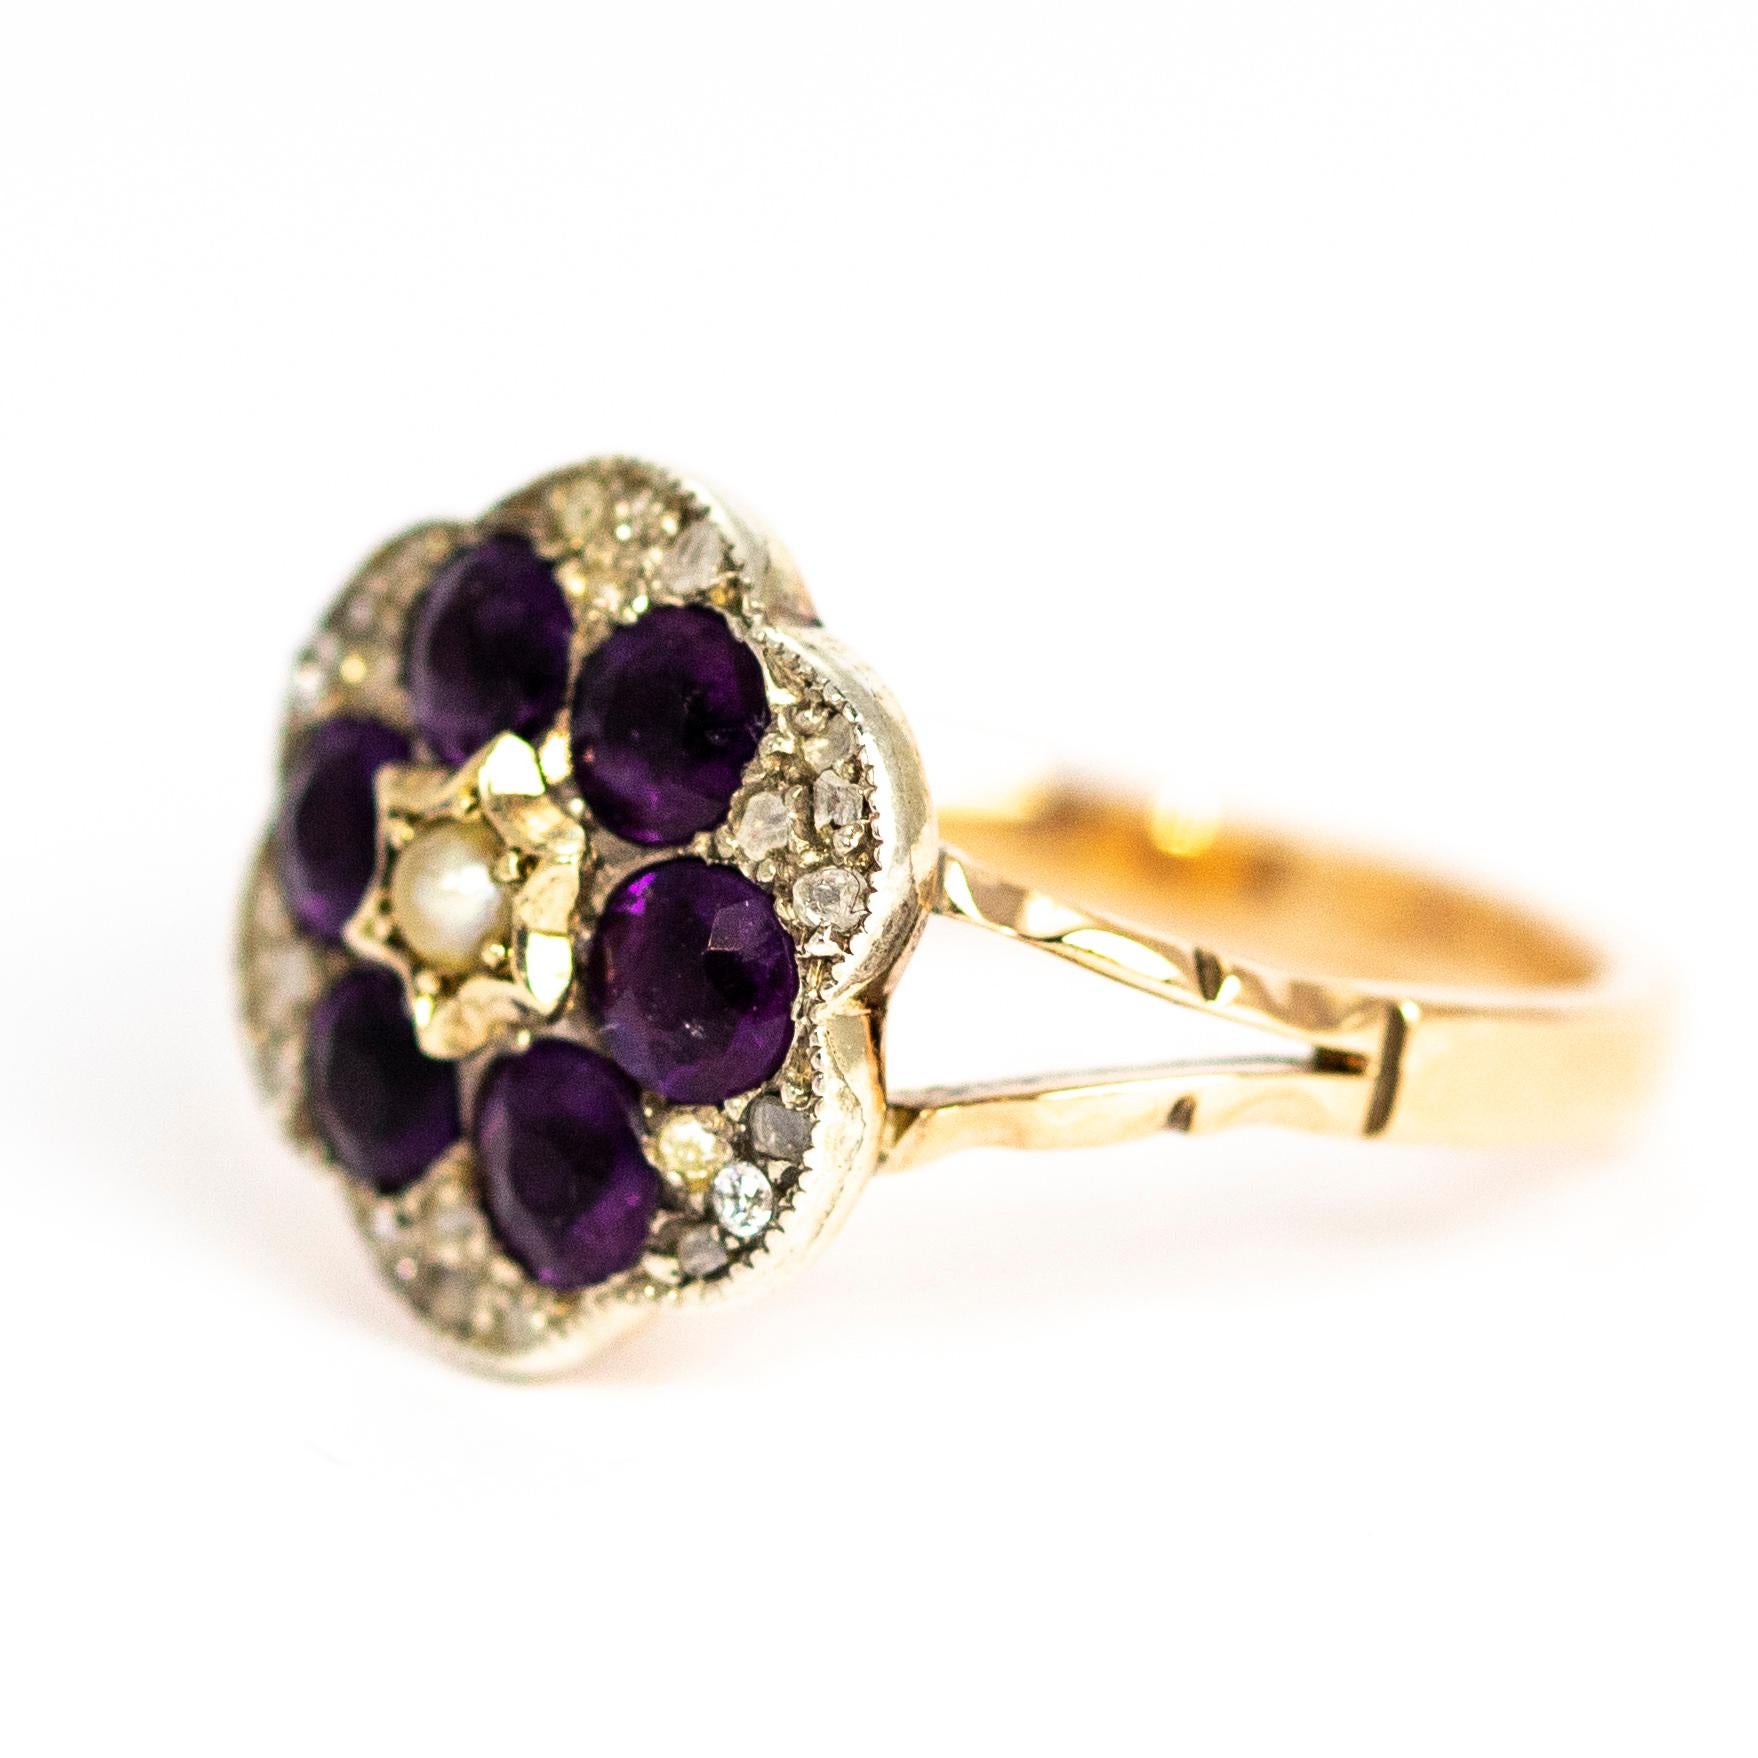 A wonderful antique early Victorian cluster ring. Centrally set with a seed pearl, surrounded by six stunning deep purple round-cut amethysts, foiled to enhance their colour. Between the amethysts in the scalloped front are six groups four white